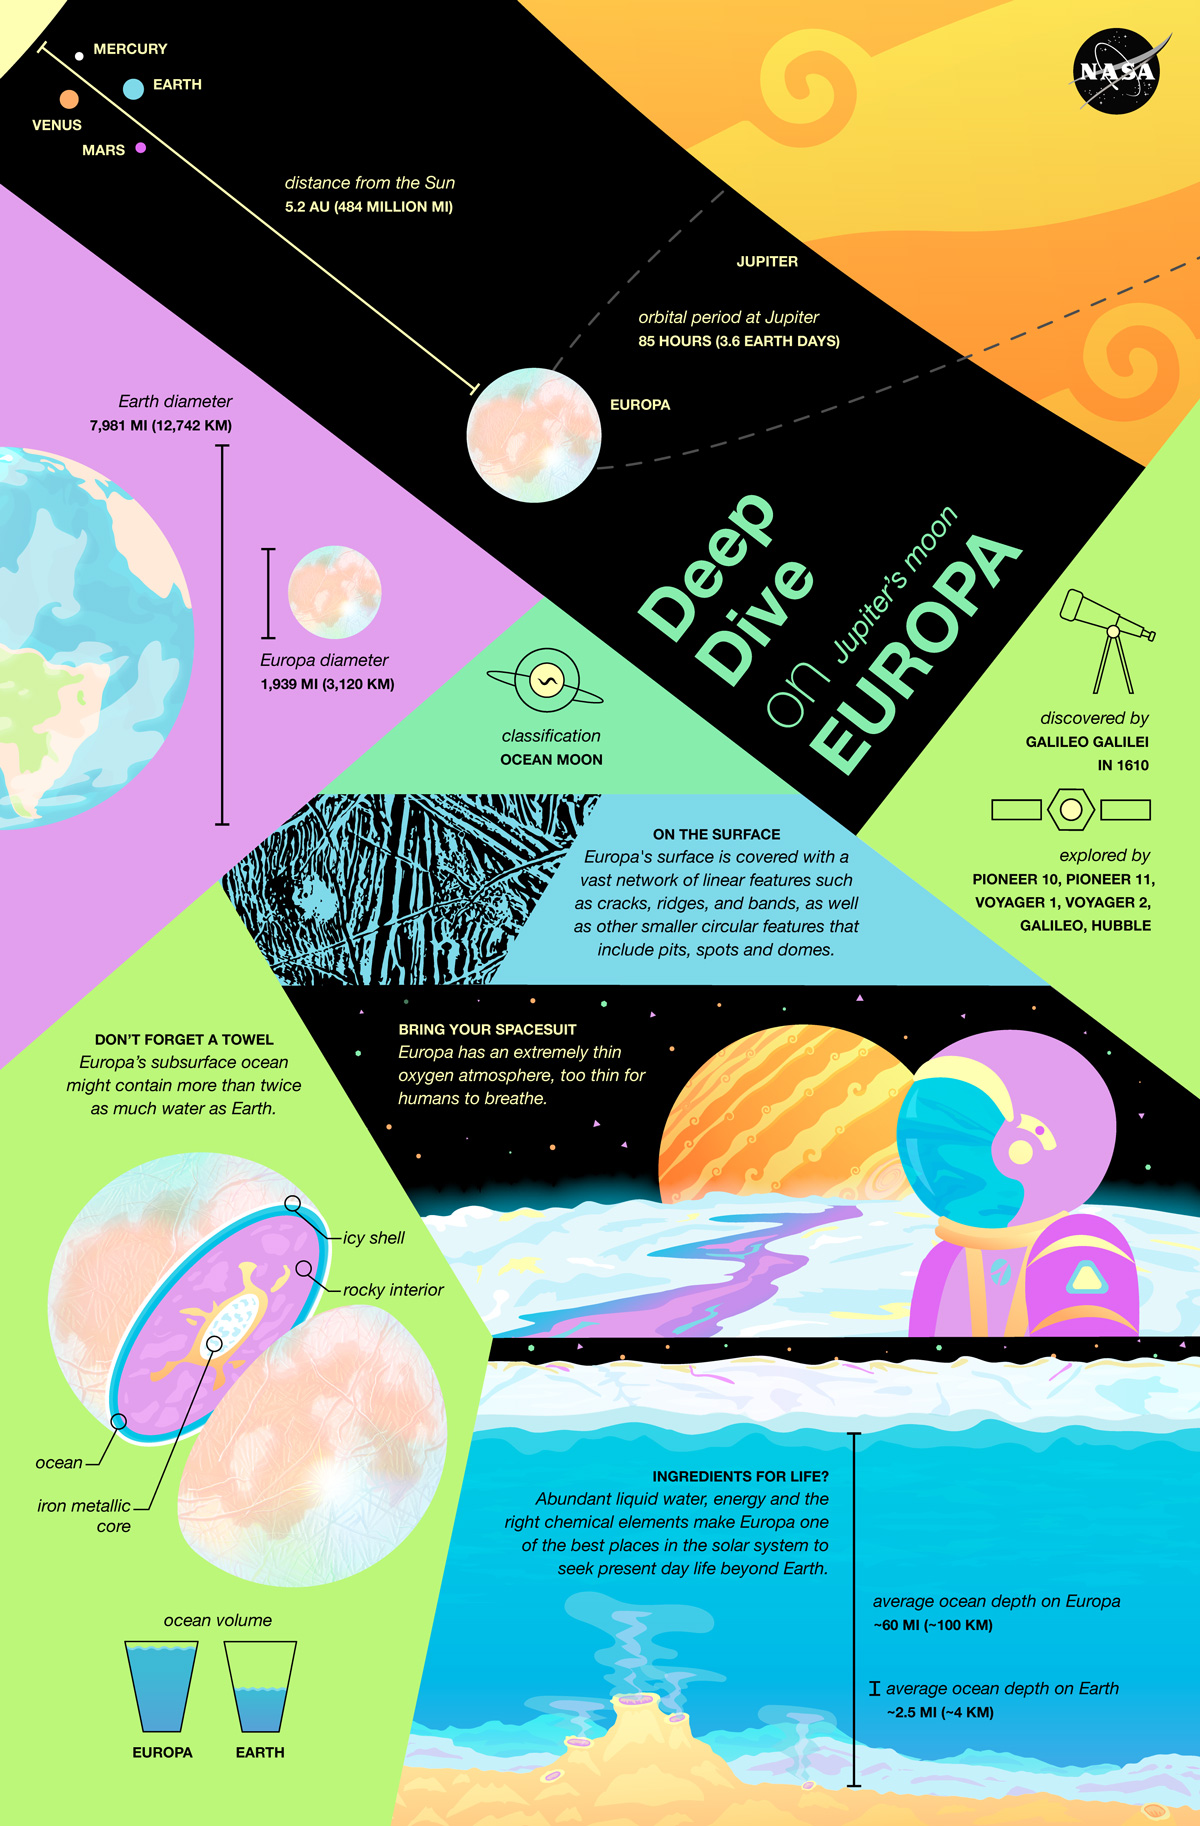 A multi-colored graphic showing various facts about Europa.